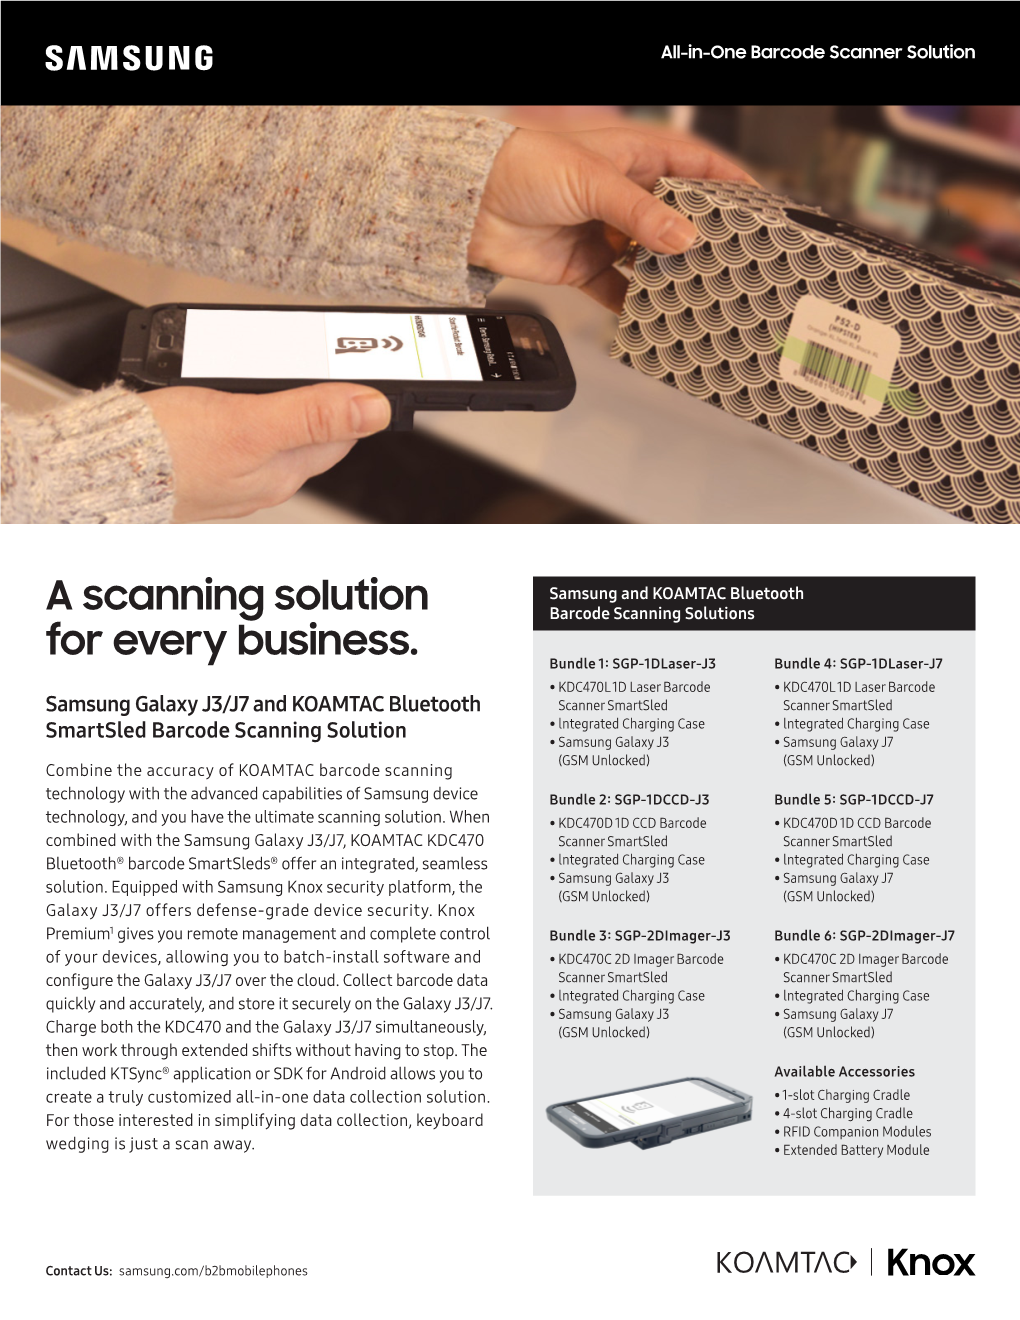 A Scanning Solution for Every Business